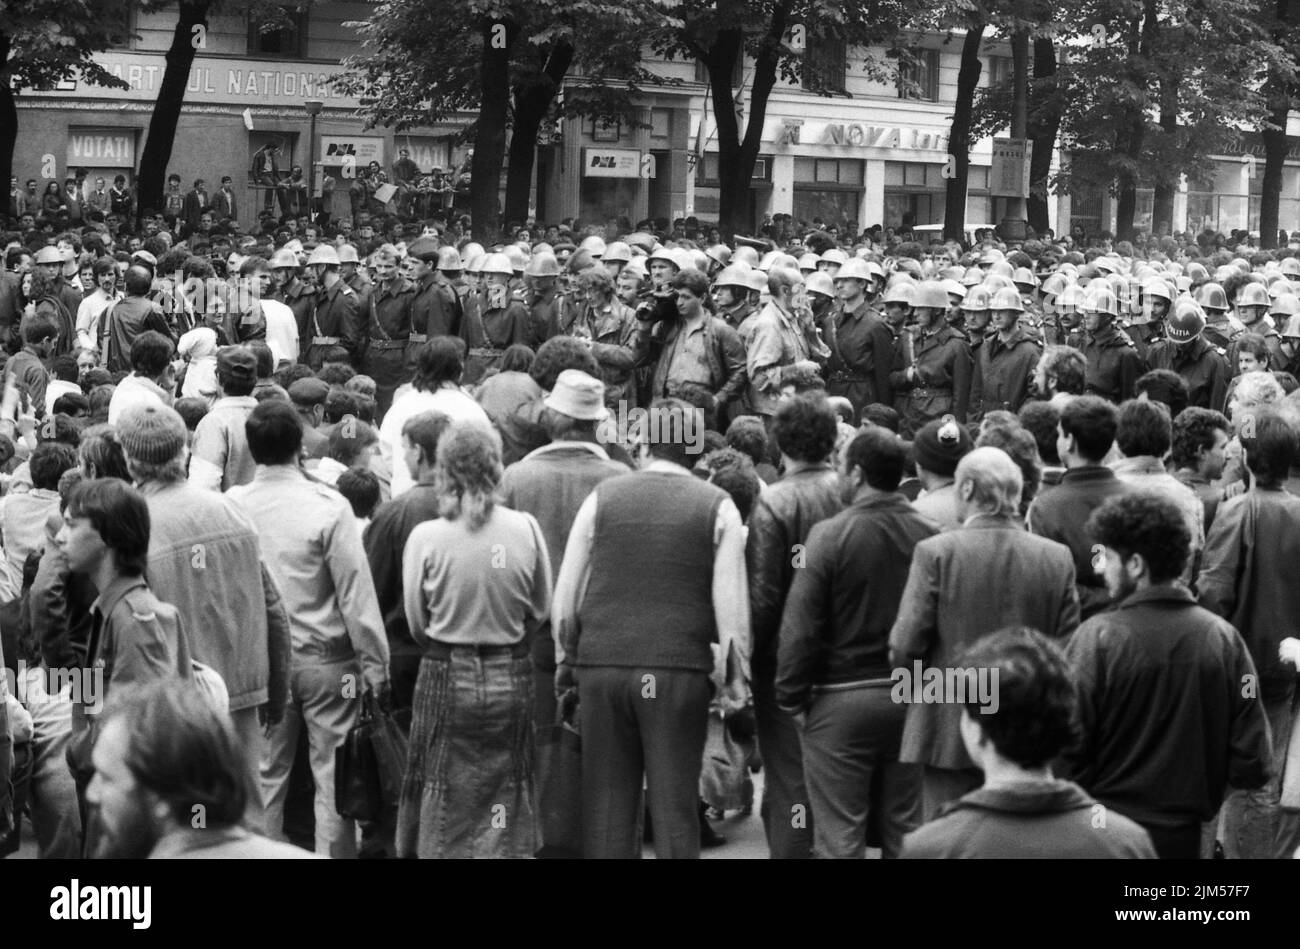 Bucharest, Romania, May 1990. Police forces during 'Golaniada', a major anti-communism protest  in the University Square following the Romanian Revolution of 1989. People would gather daily to protest the ex-communists that took the power after the Revolution. Stock Photo